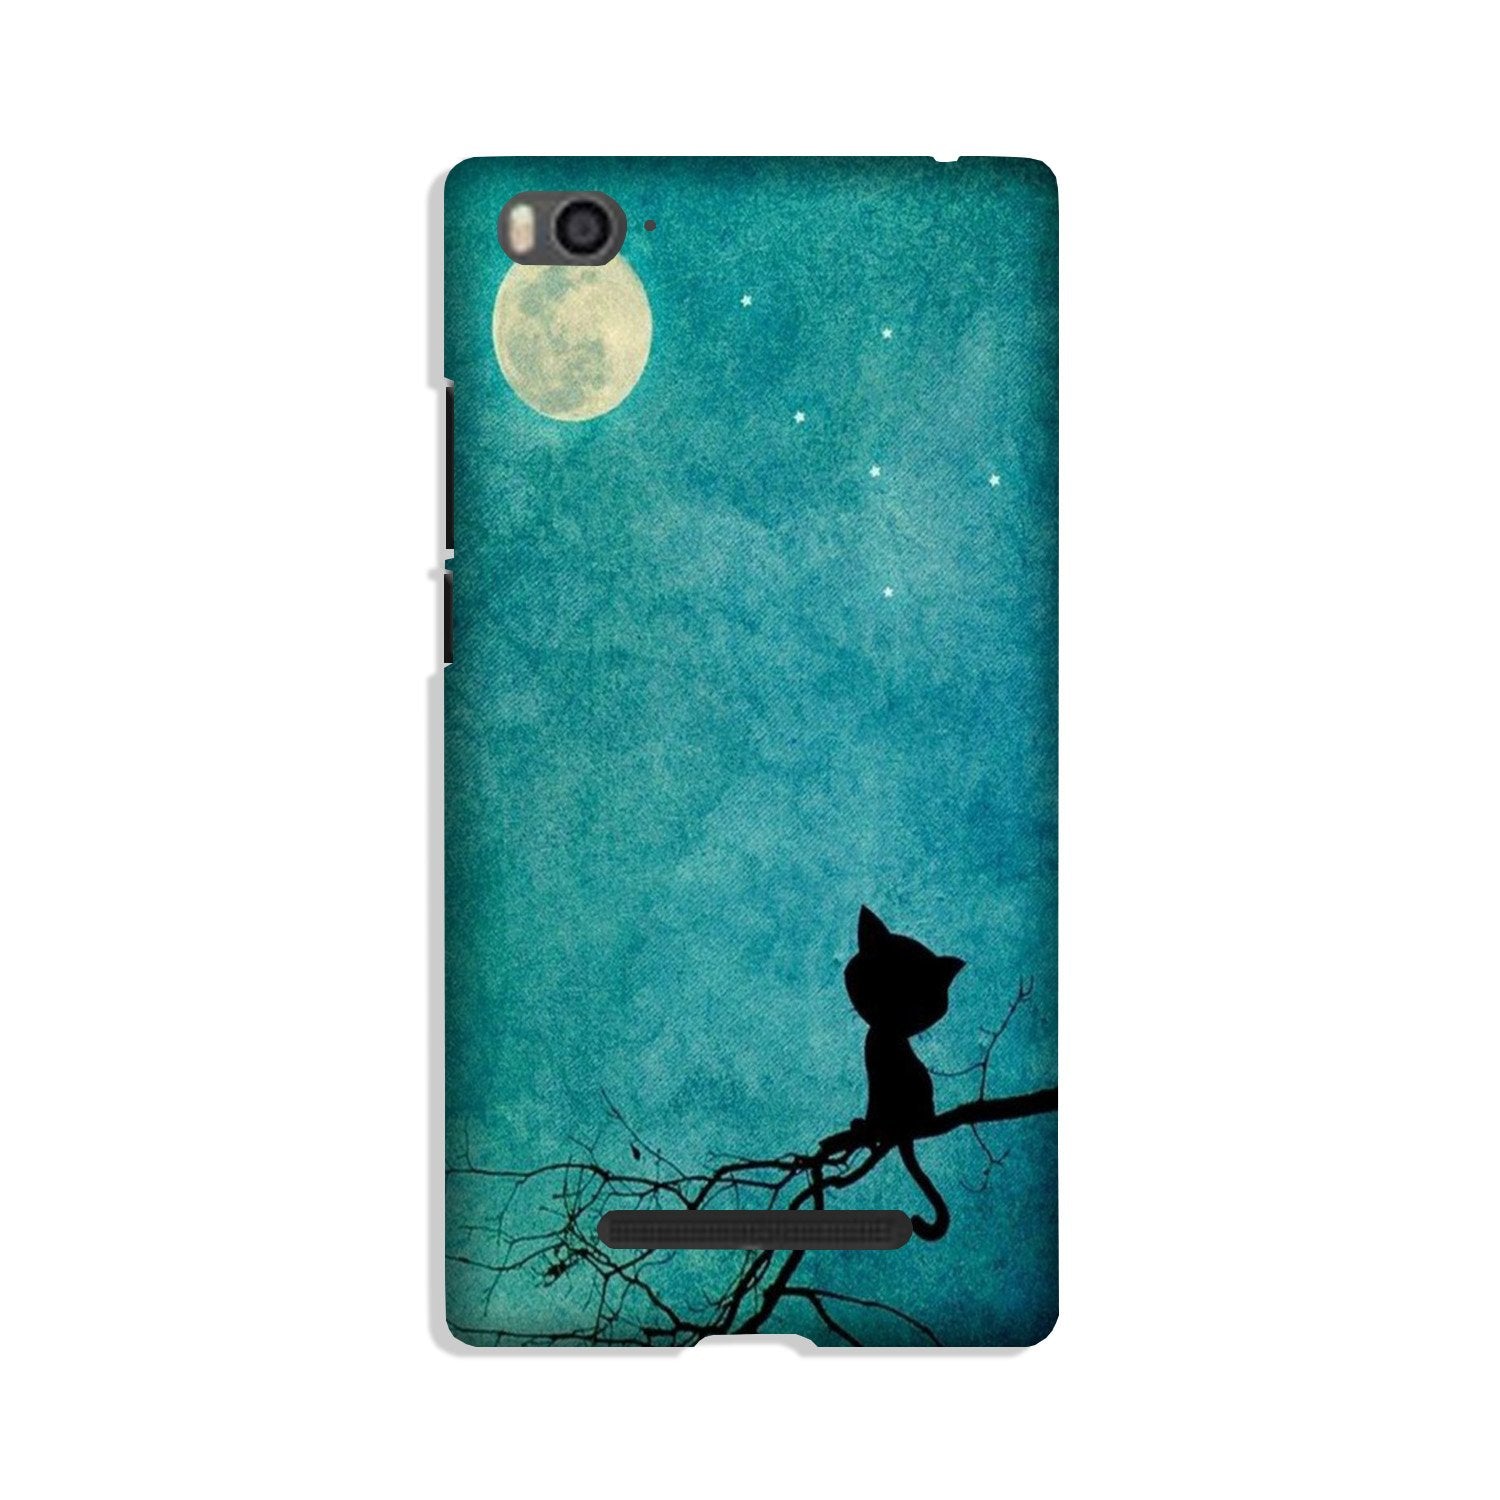 Moon cat Case for Redmi 4A